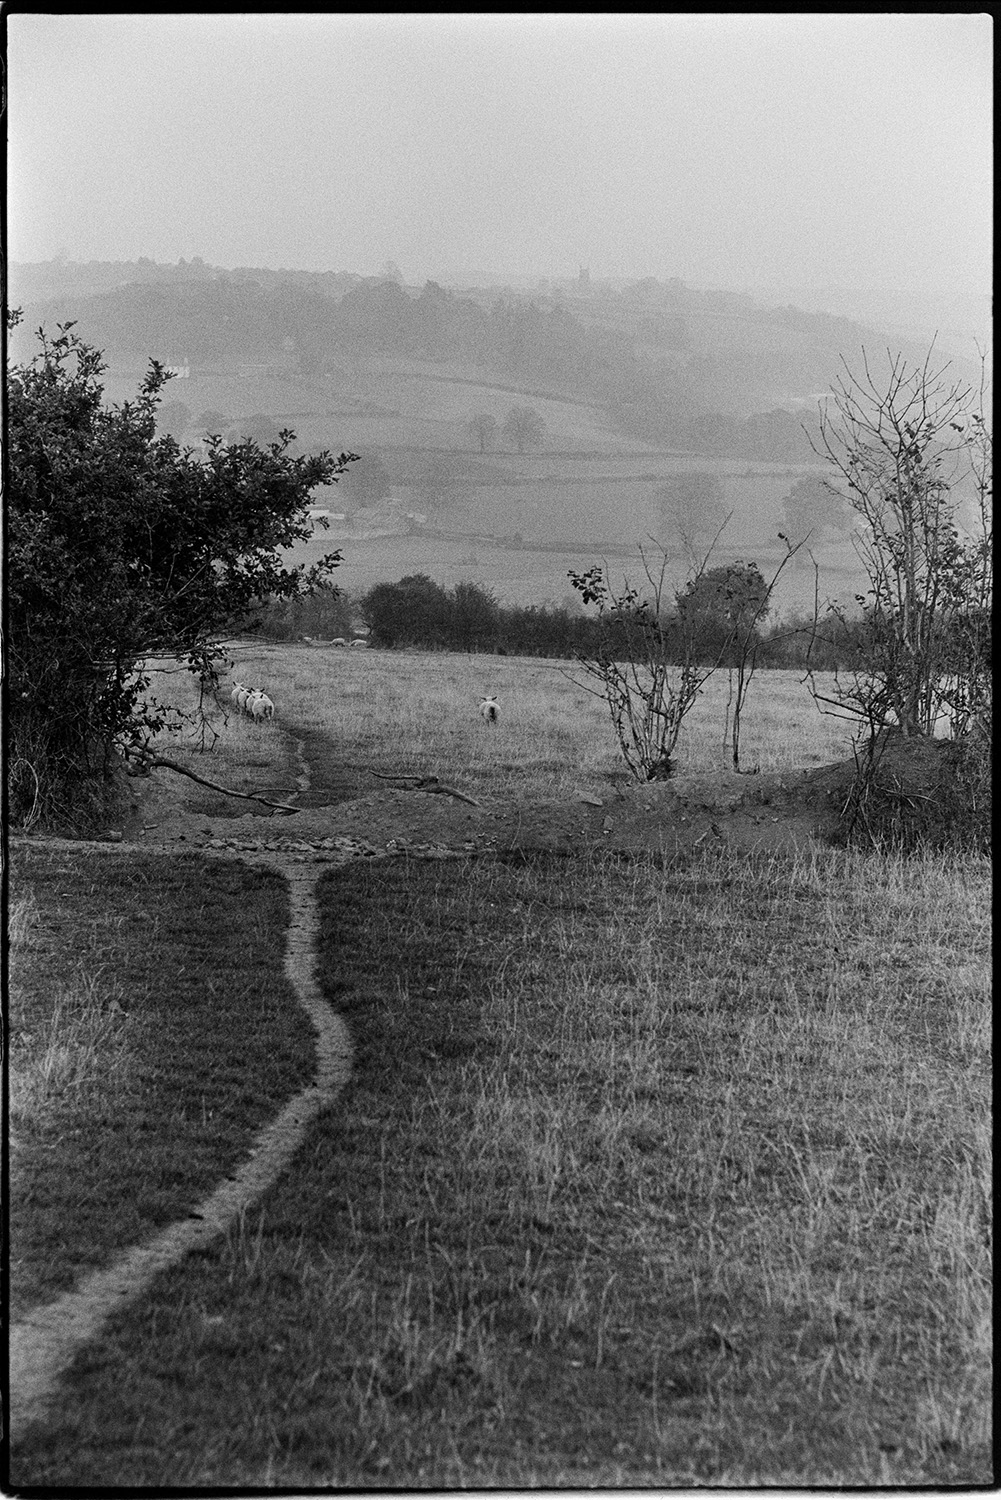 Landscapes with sheep and close up shots of old hedge, lens test. 
[Sheep walking along a worn footpath through a field at Bridge Reeve, Chulmleigh. Fields, trees and hedges can be seen in the background. This image was taken by James Ravilious to try a new lens.]